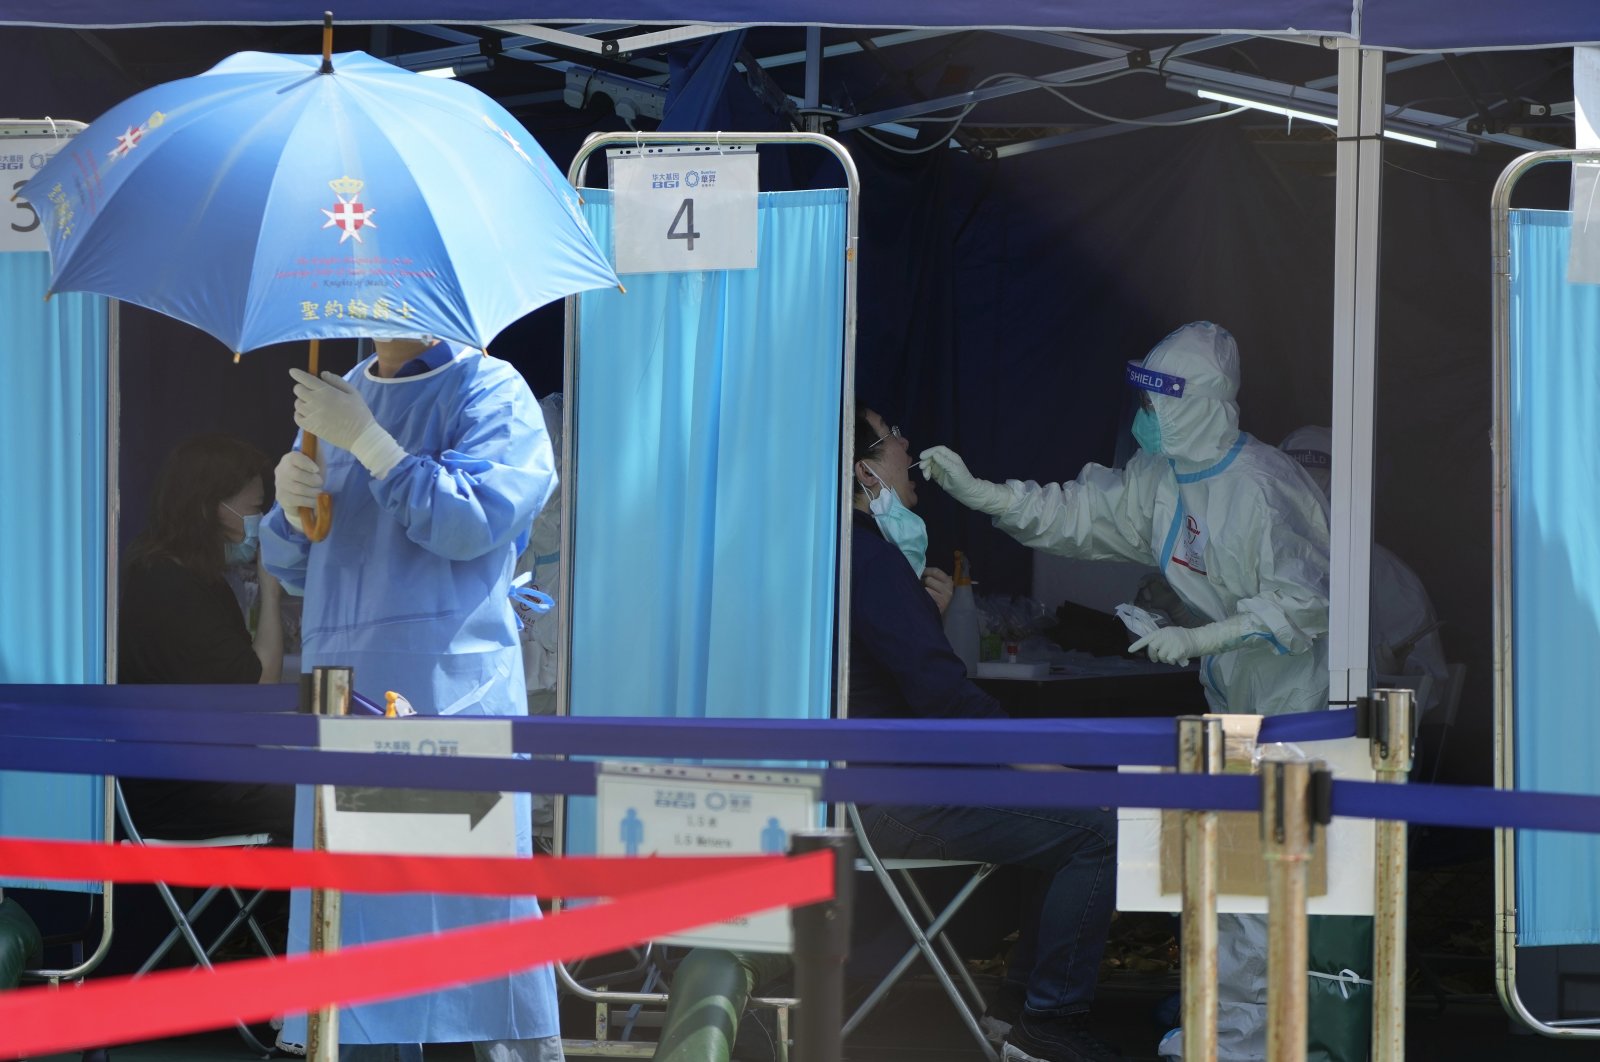 Medical workers help residents get tested for the coronavirus at a temporary testing center in Hong Kong, China, March 14, 2022. (AP Photo)